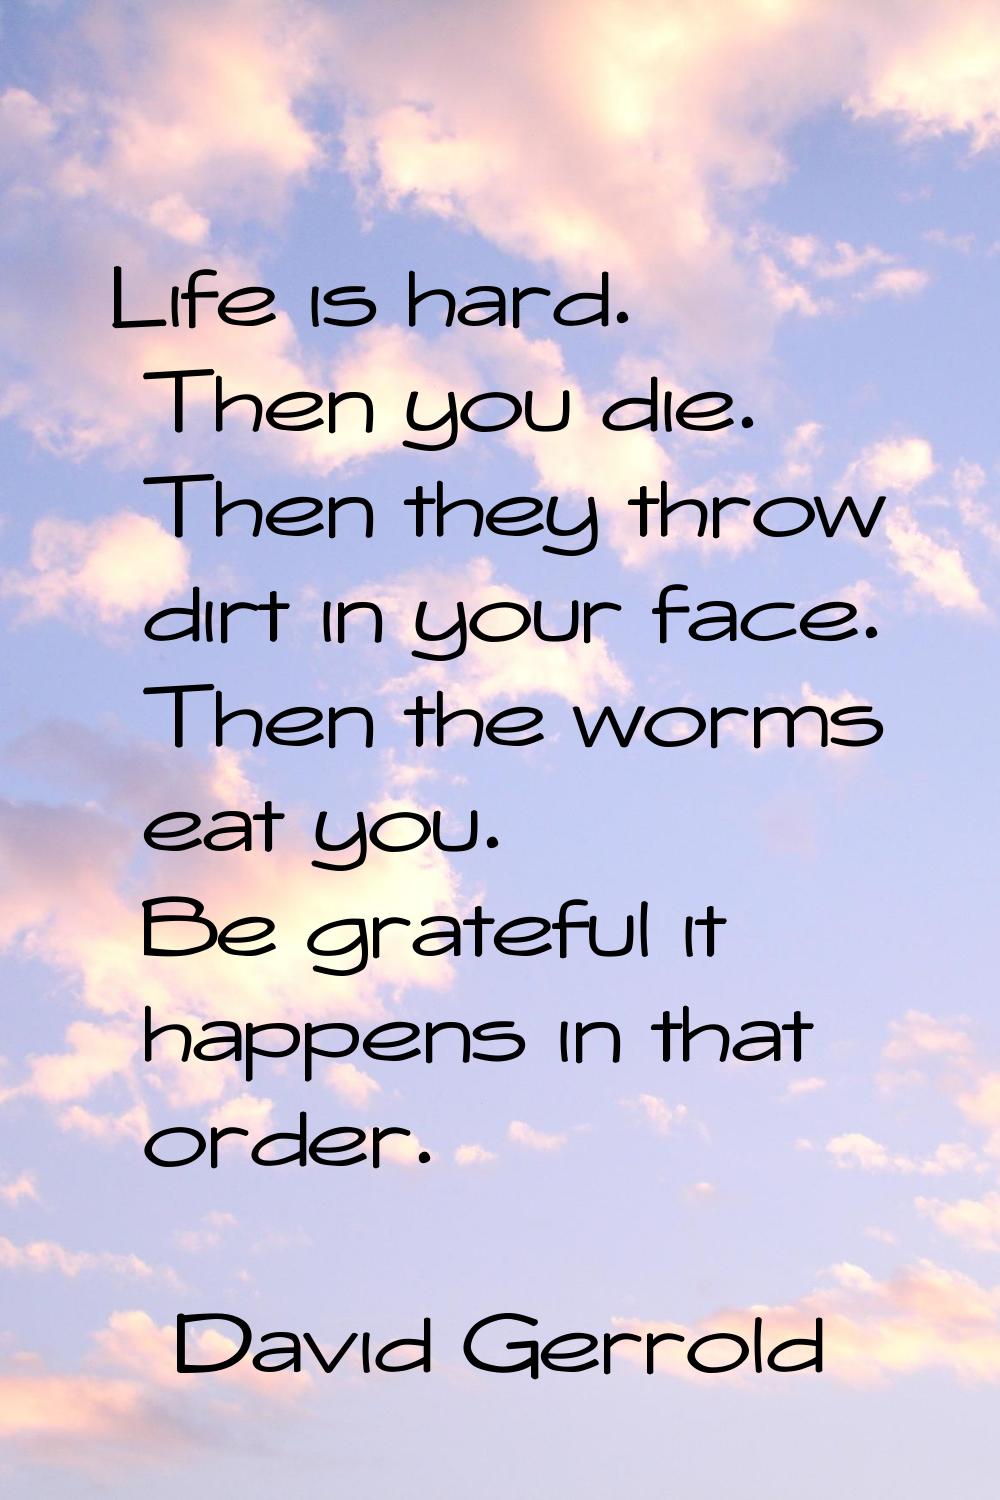 Life is hard. Then you die. Then they throw dirt in your face. Then the worms eat you. Be grateful 